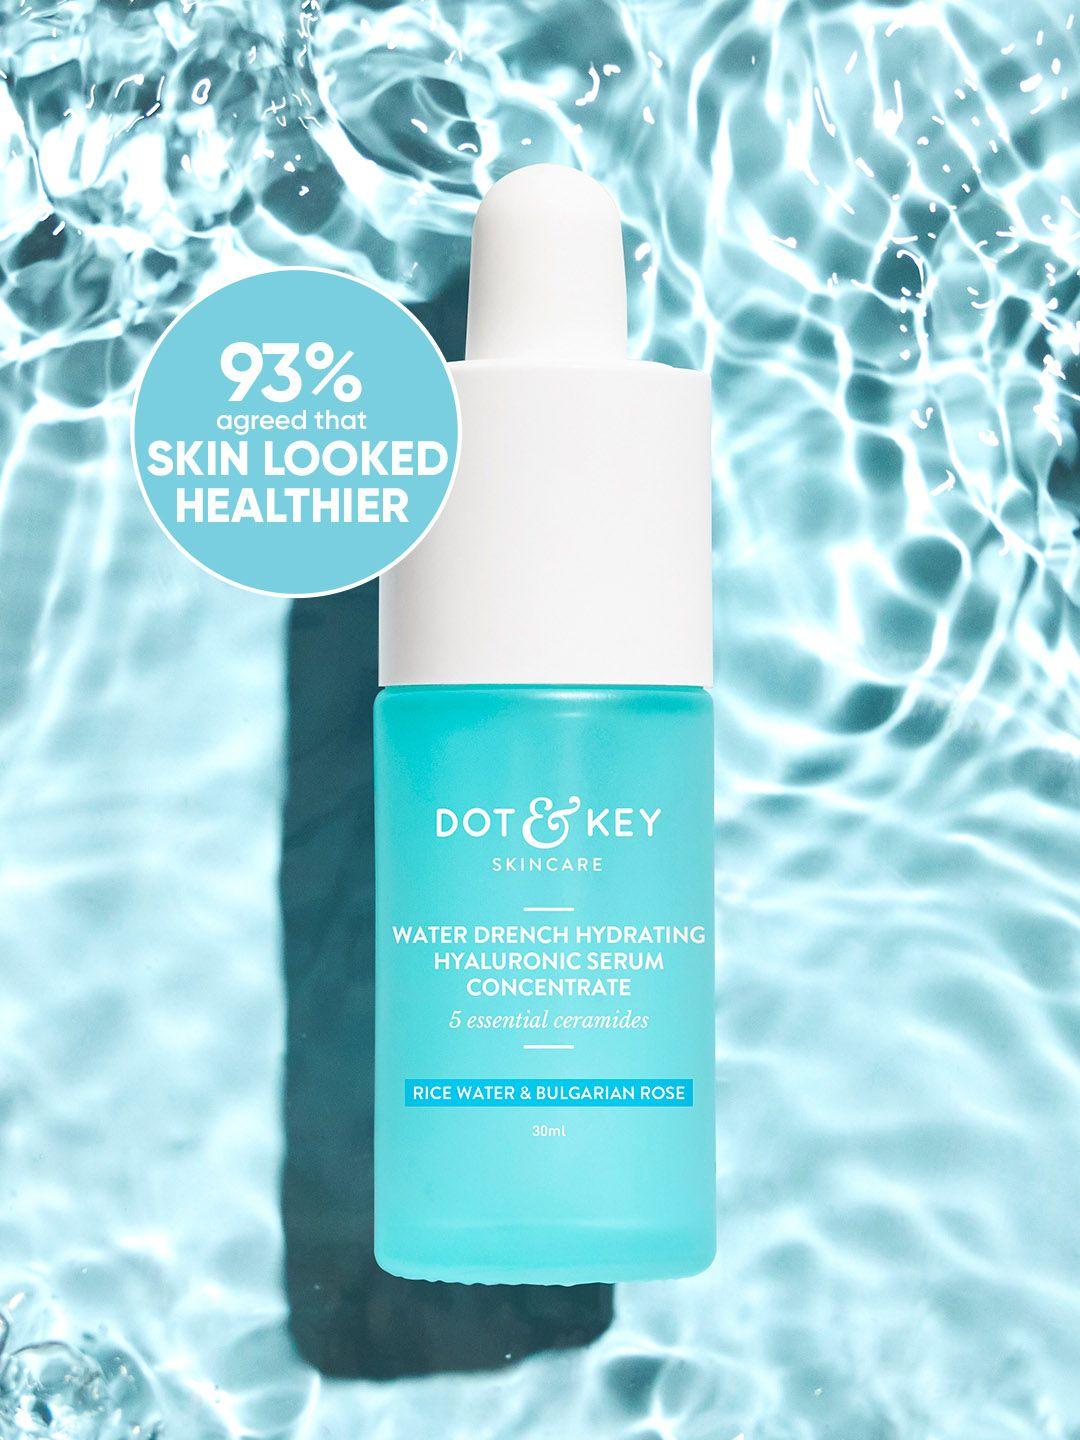 dot-&-key-hydrating-hyaluronic-face-serum-with-vitamin-c-&-e-for-plump-glowing-skin--30ml